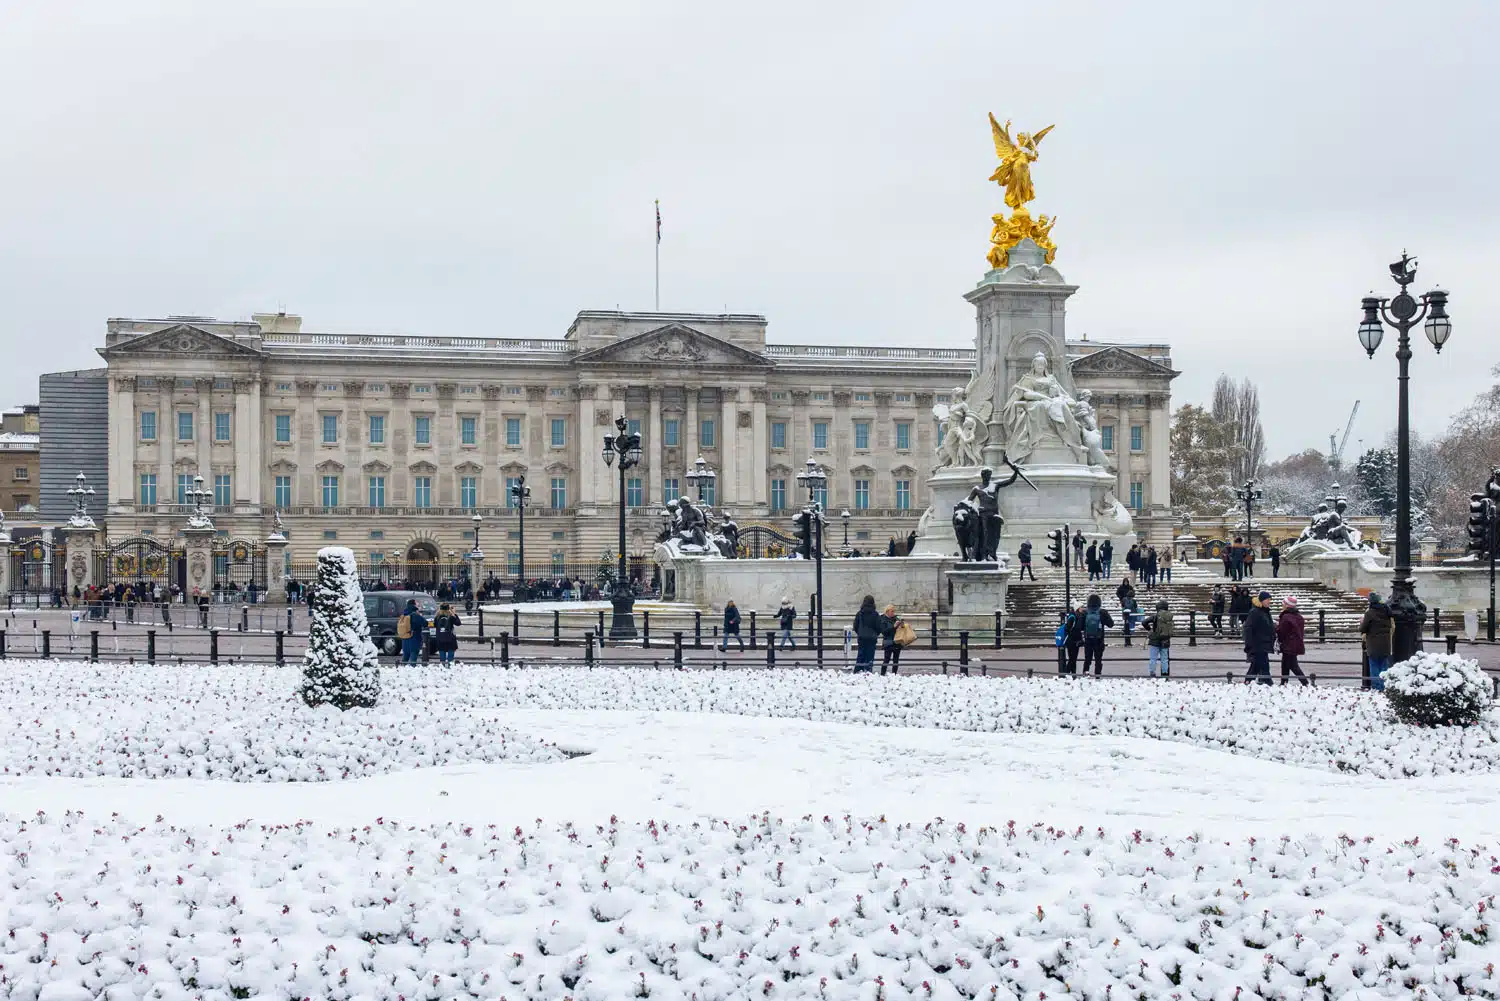 Buckingham Palace Snow | Things to do in London at Christmas